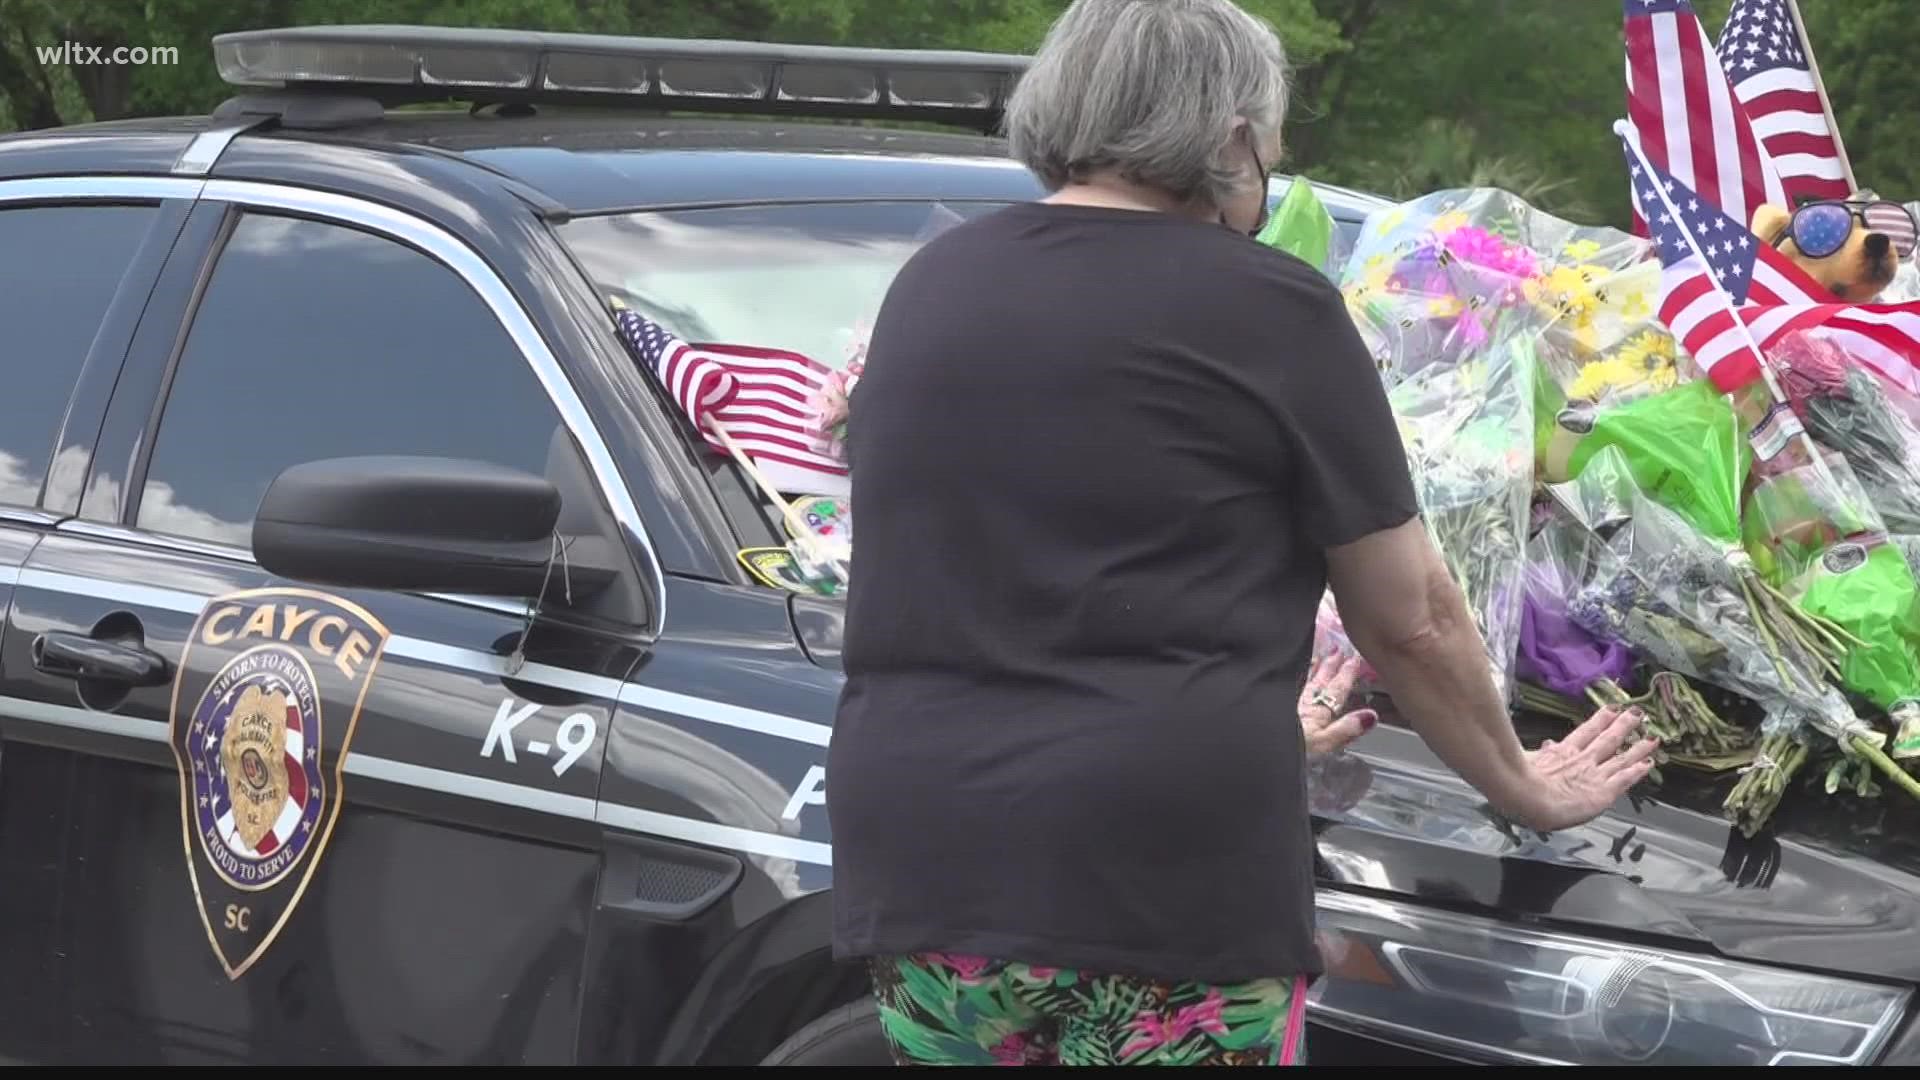 At police headquarters, Barr's patrol vehicle has turned into a memorial. Flowers, notes, and gifts are displayed on the hood.